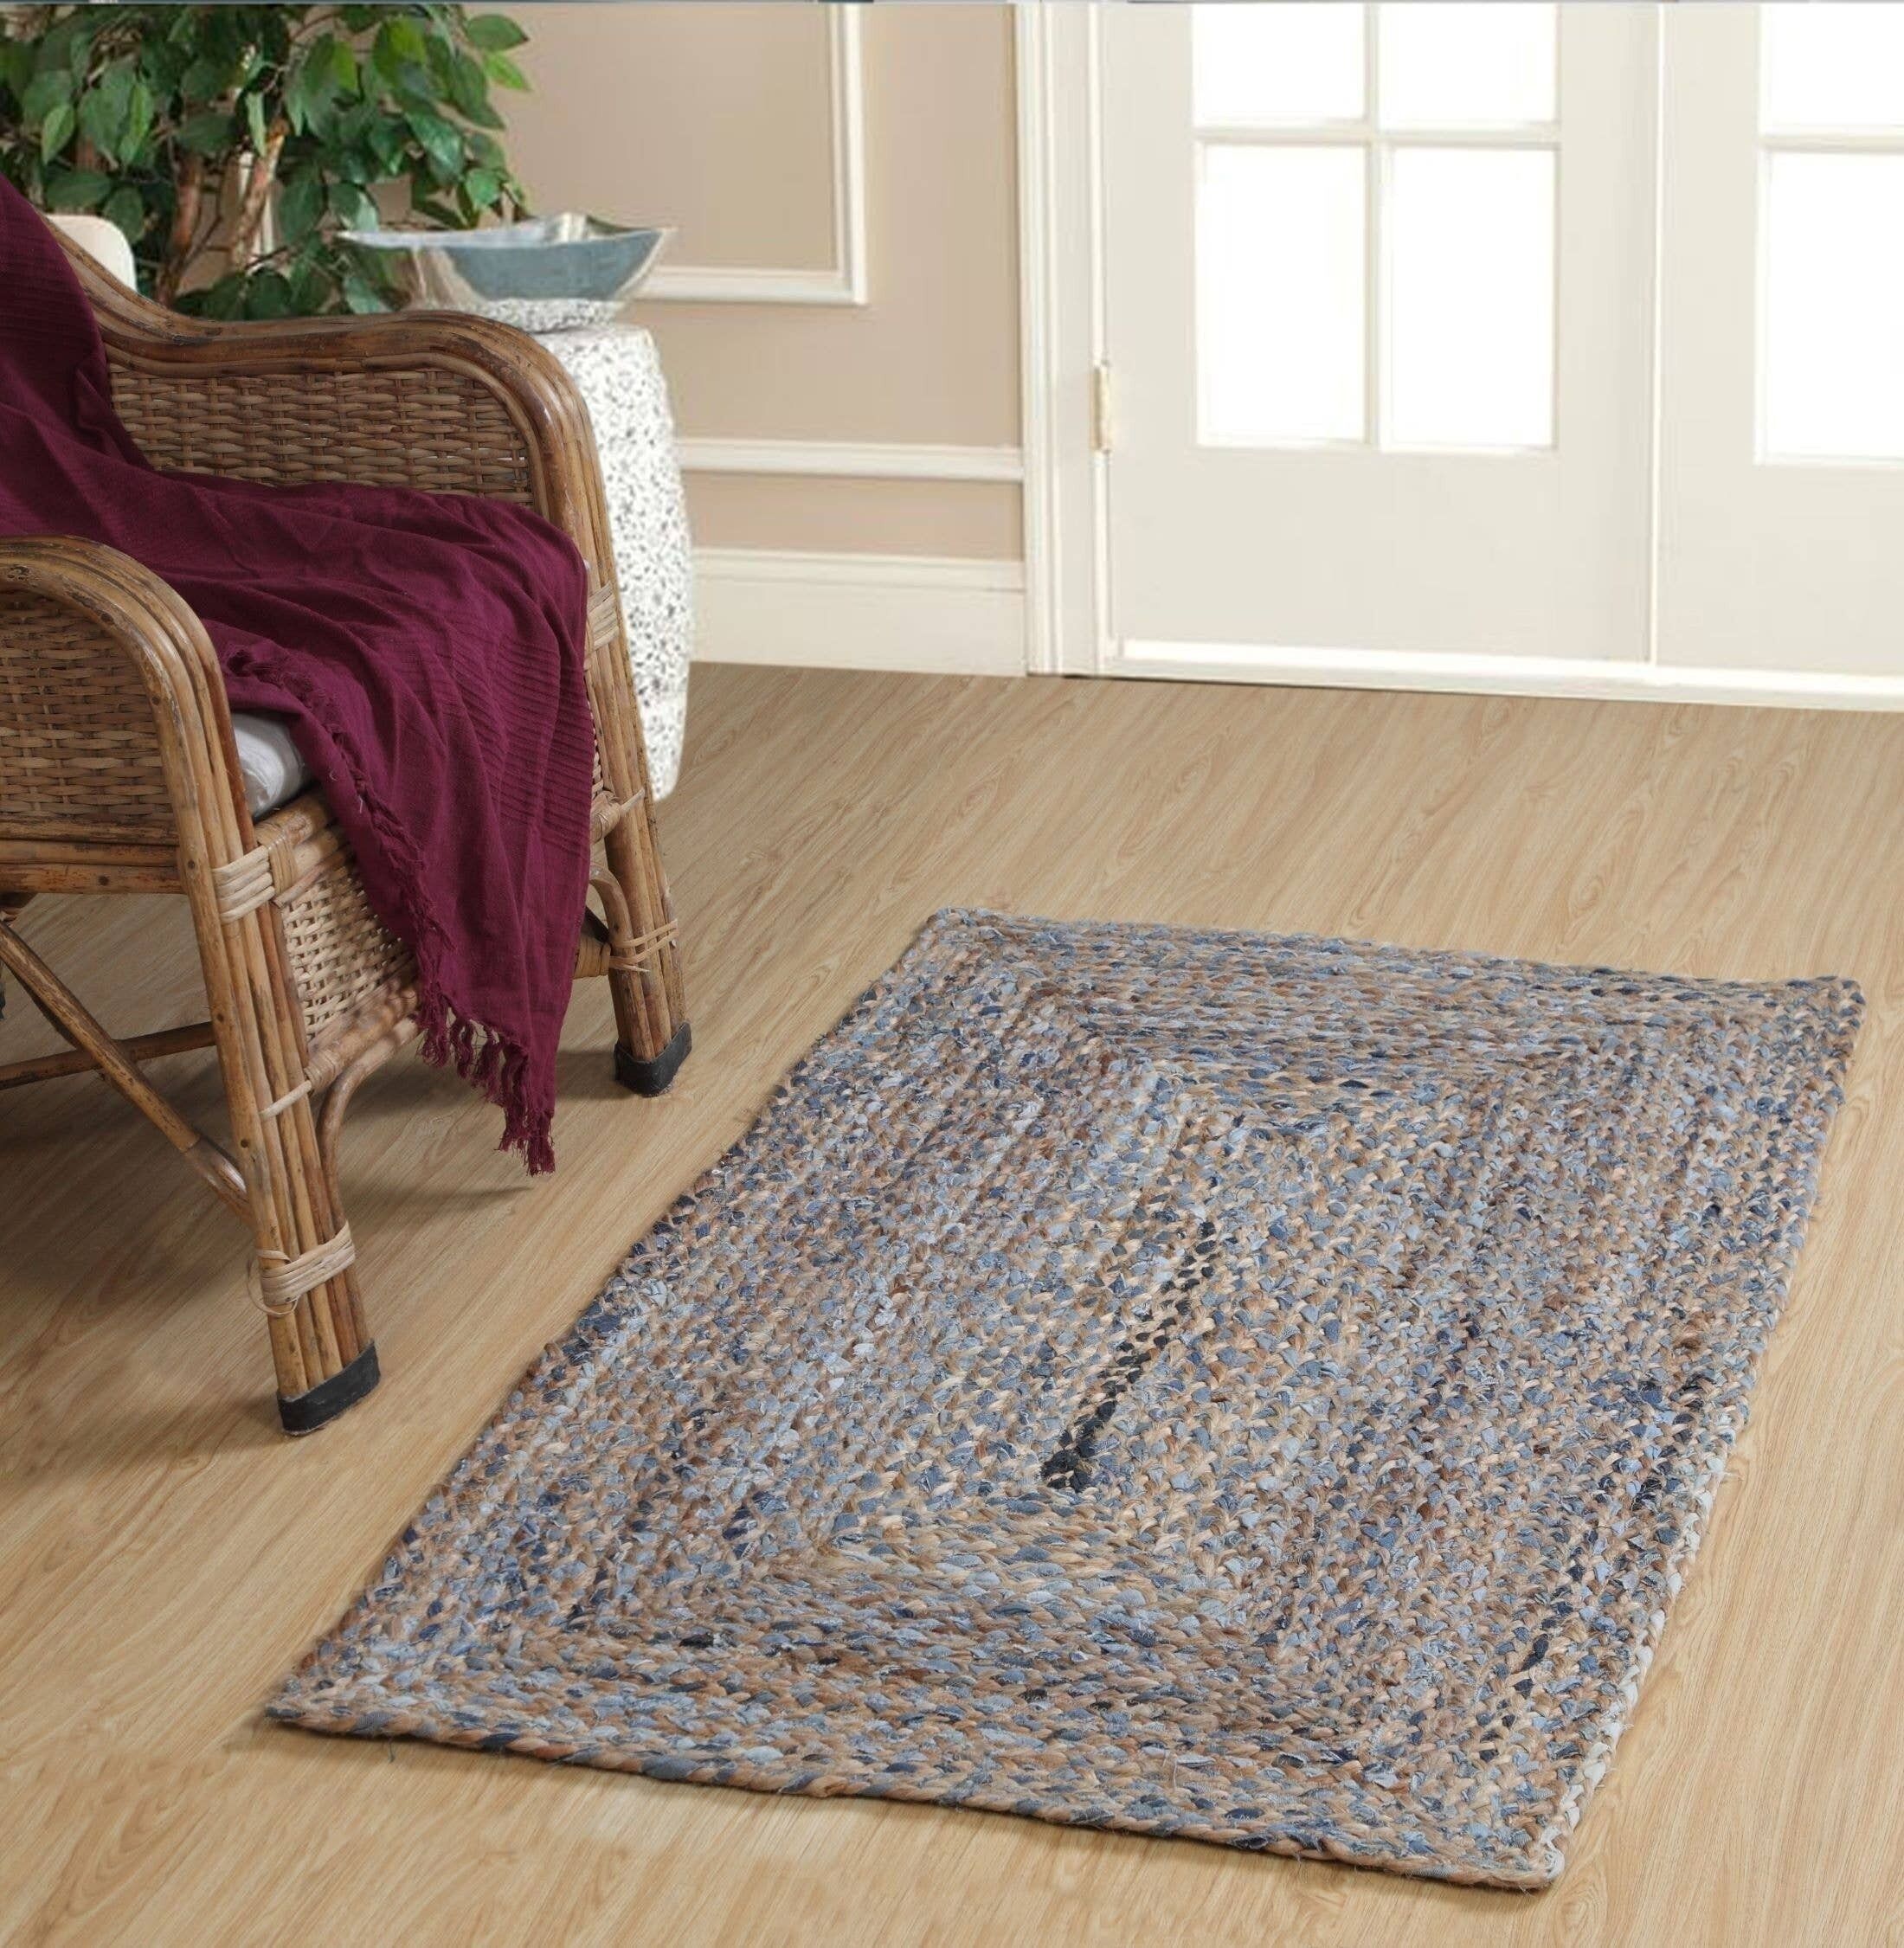 Buy Denim Jute Rug in Rugs Runner, Square, Circle, Oval. for Floor and Home  Decor, for Indoor and Outdoor, Patio, Living Room, Bedroom, Nursery Online  in India - Etsy